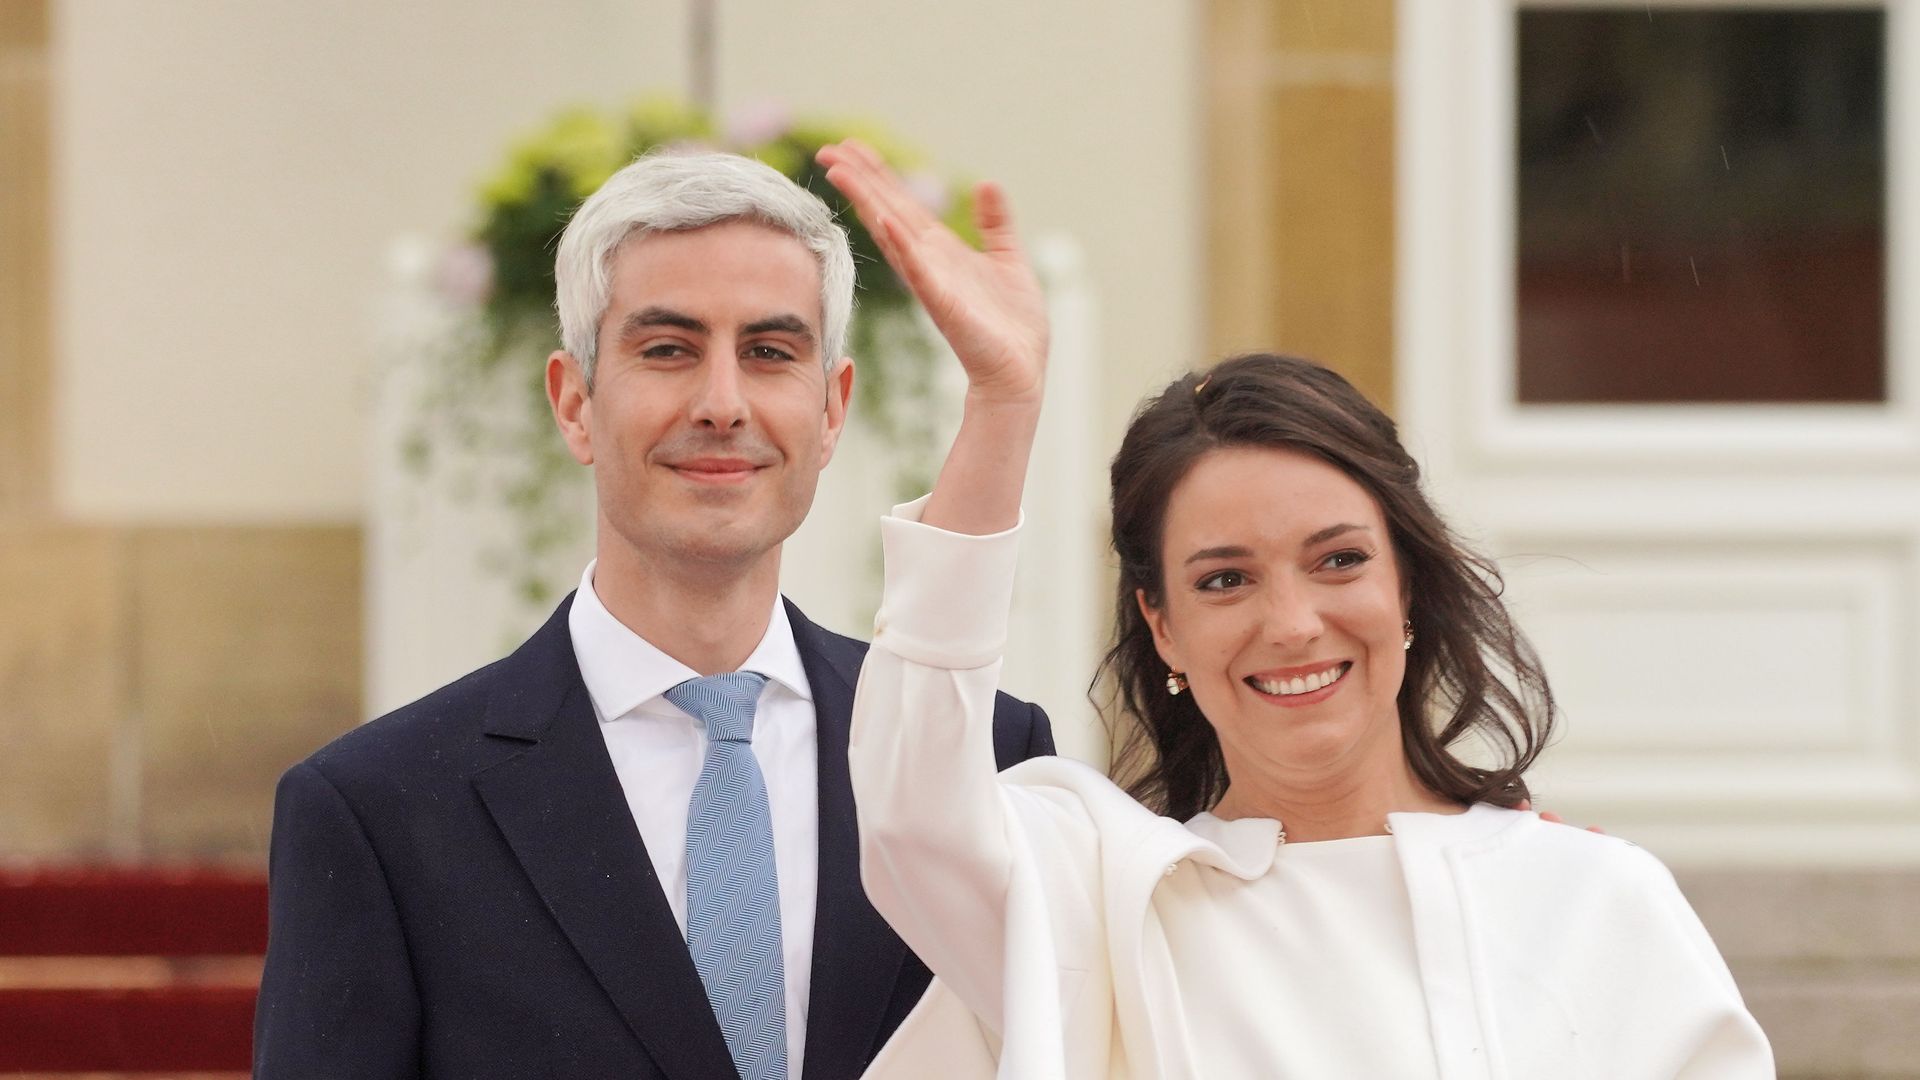 woman in white suit waving joined by man in suit 